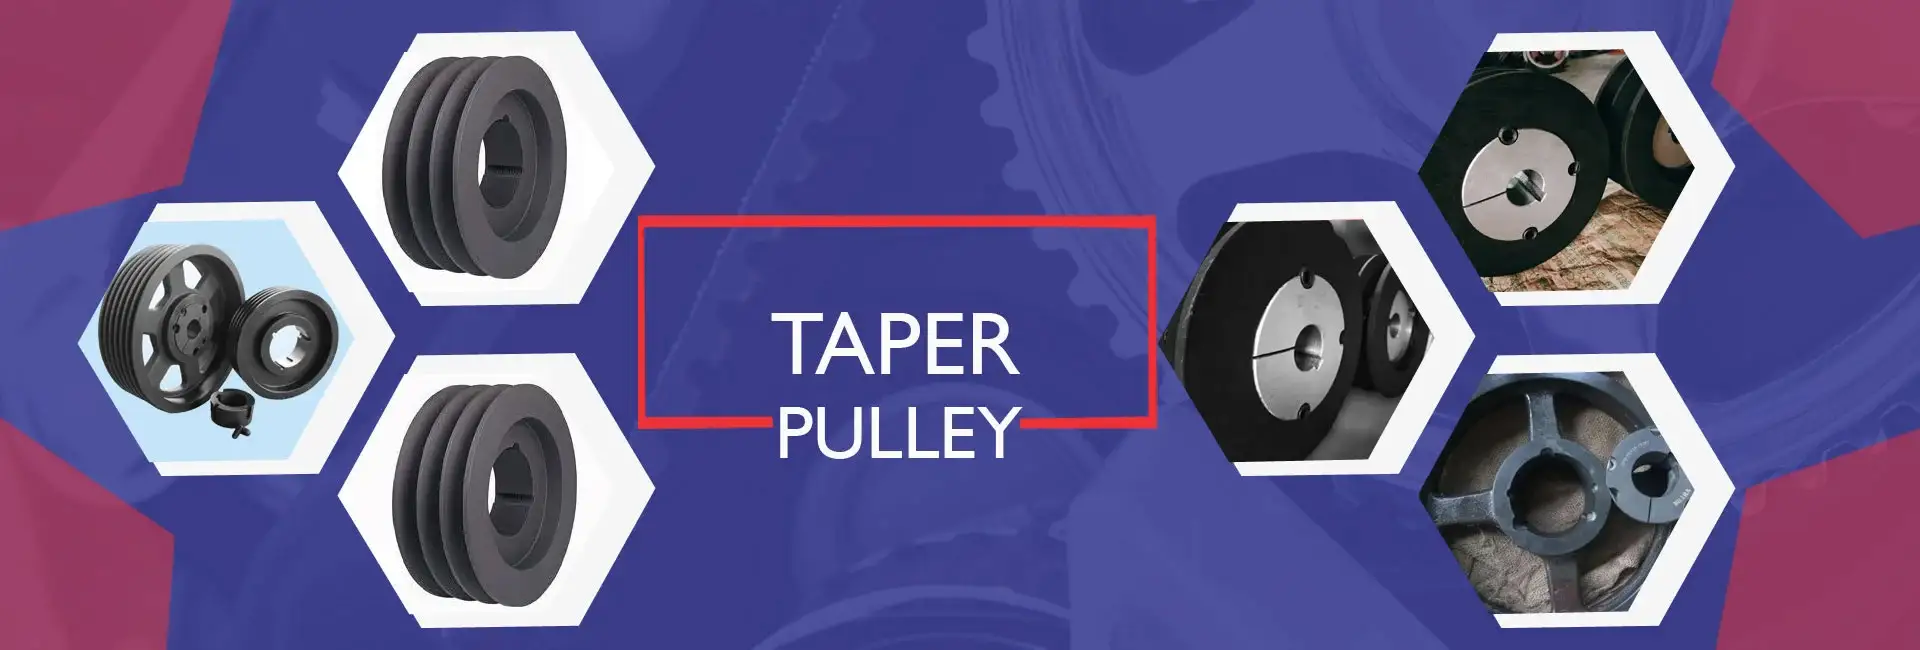 Taper Pulley Manufacturer